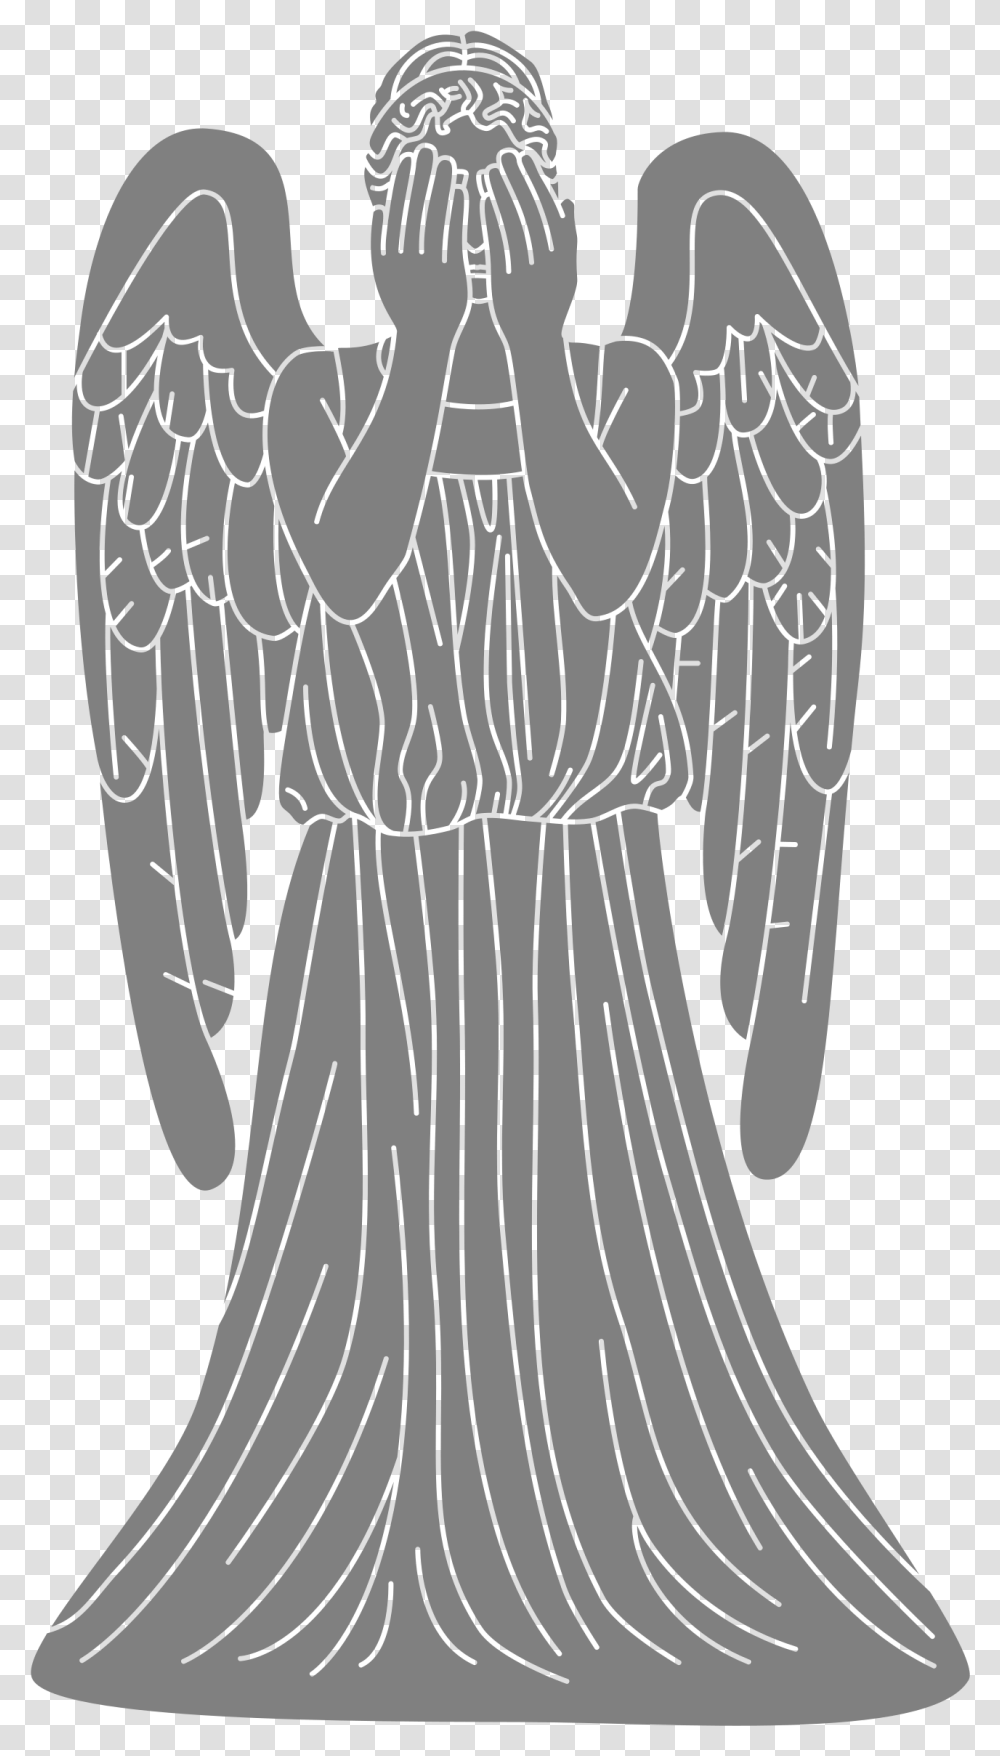 This Free Icons Design Of Weeping Angel Download Doctor Who Weeping Angel Cartoon, Archangel, Sculpture, Statue, Sleeve Transparent Png